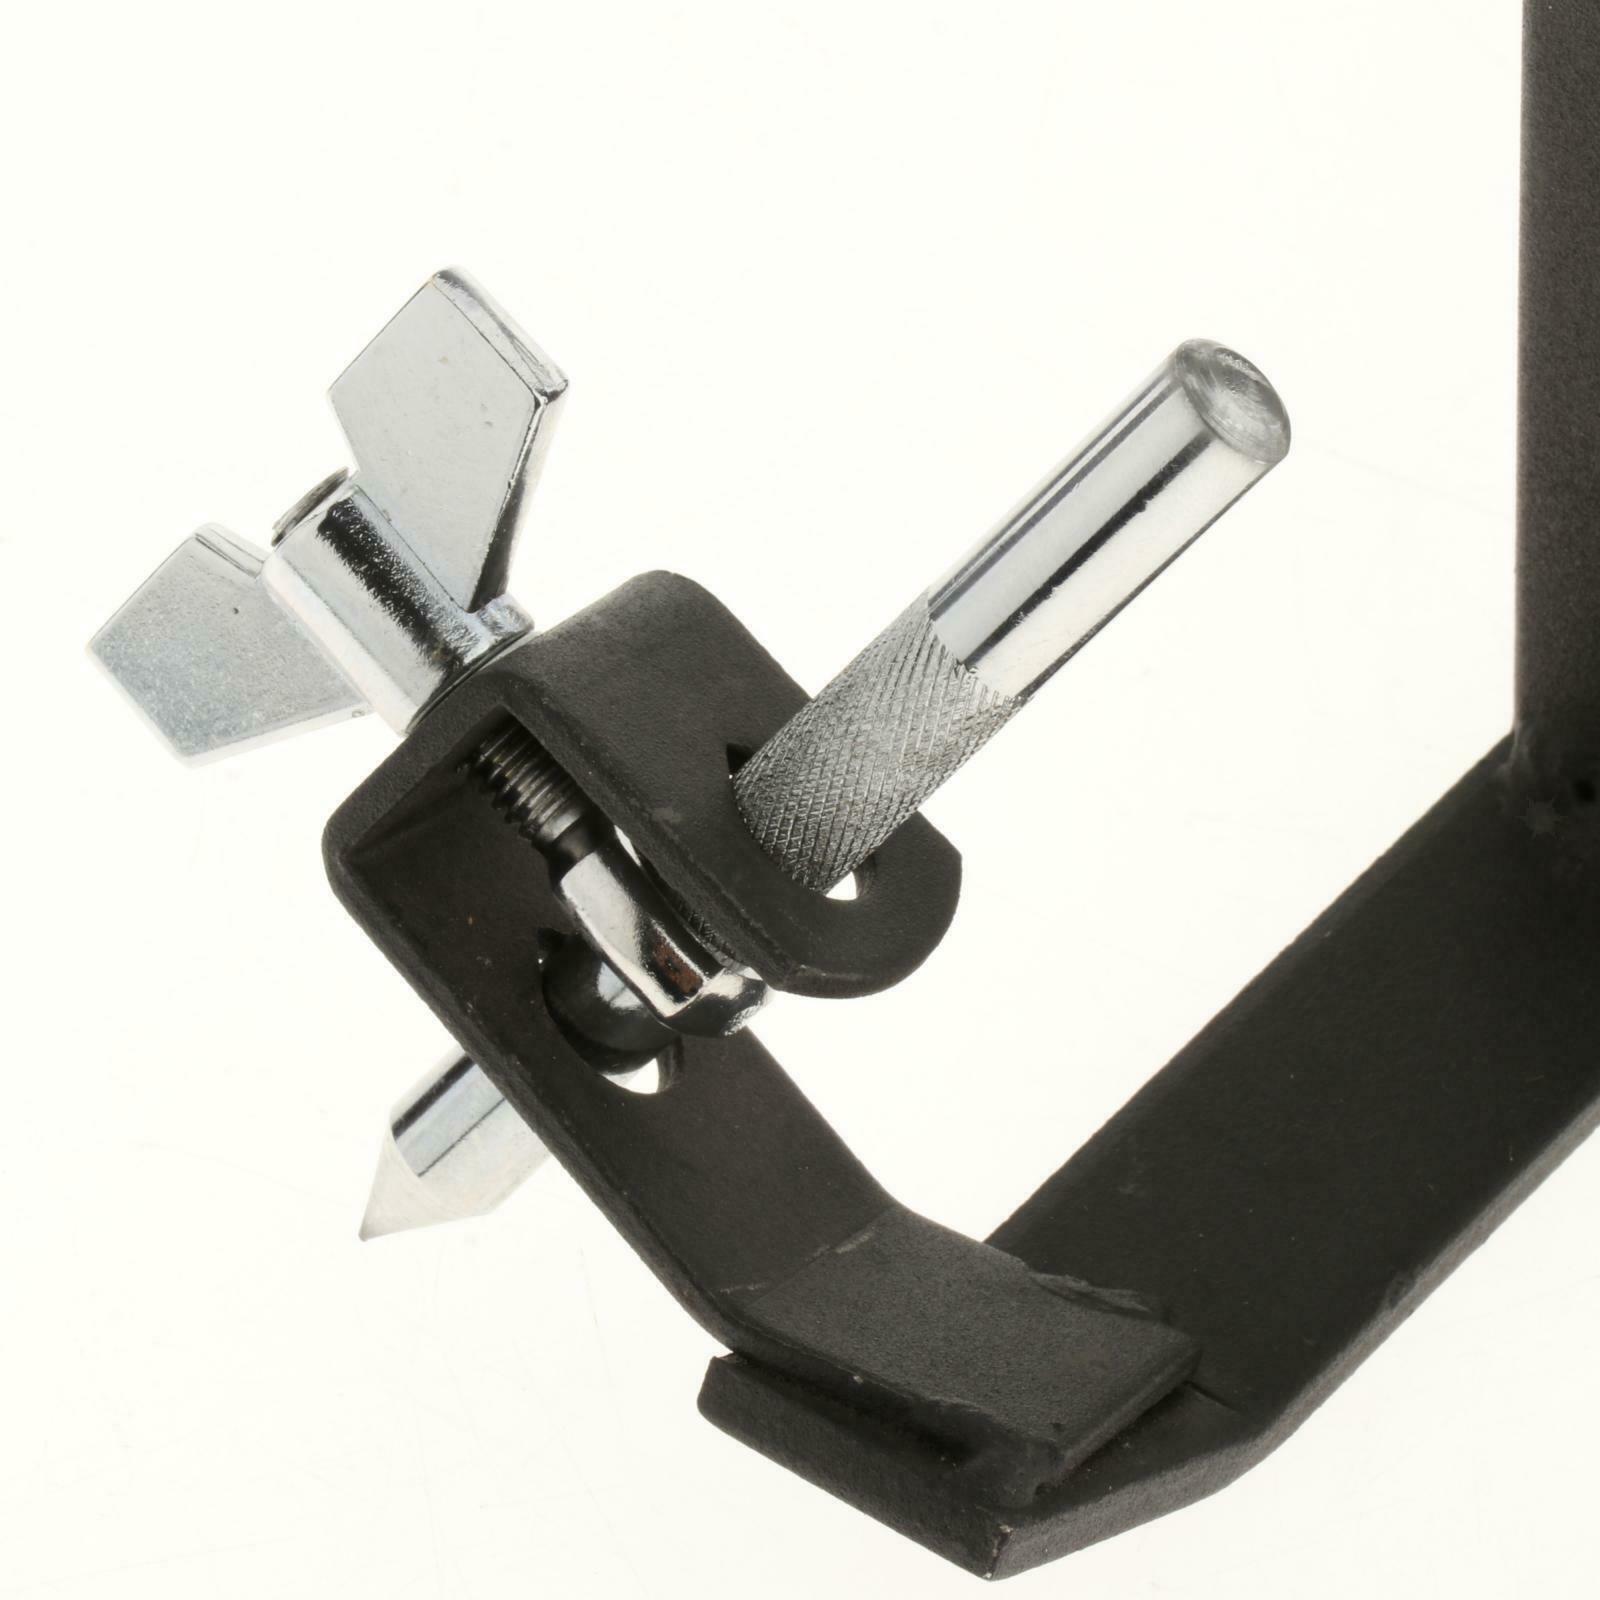 Pedal Cowbell Bracket Attach Percussion for Practice Room Drum Kit